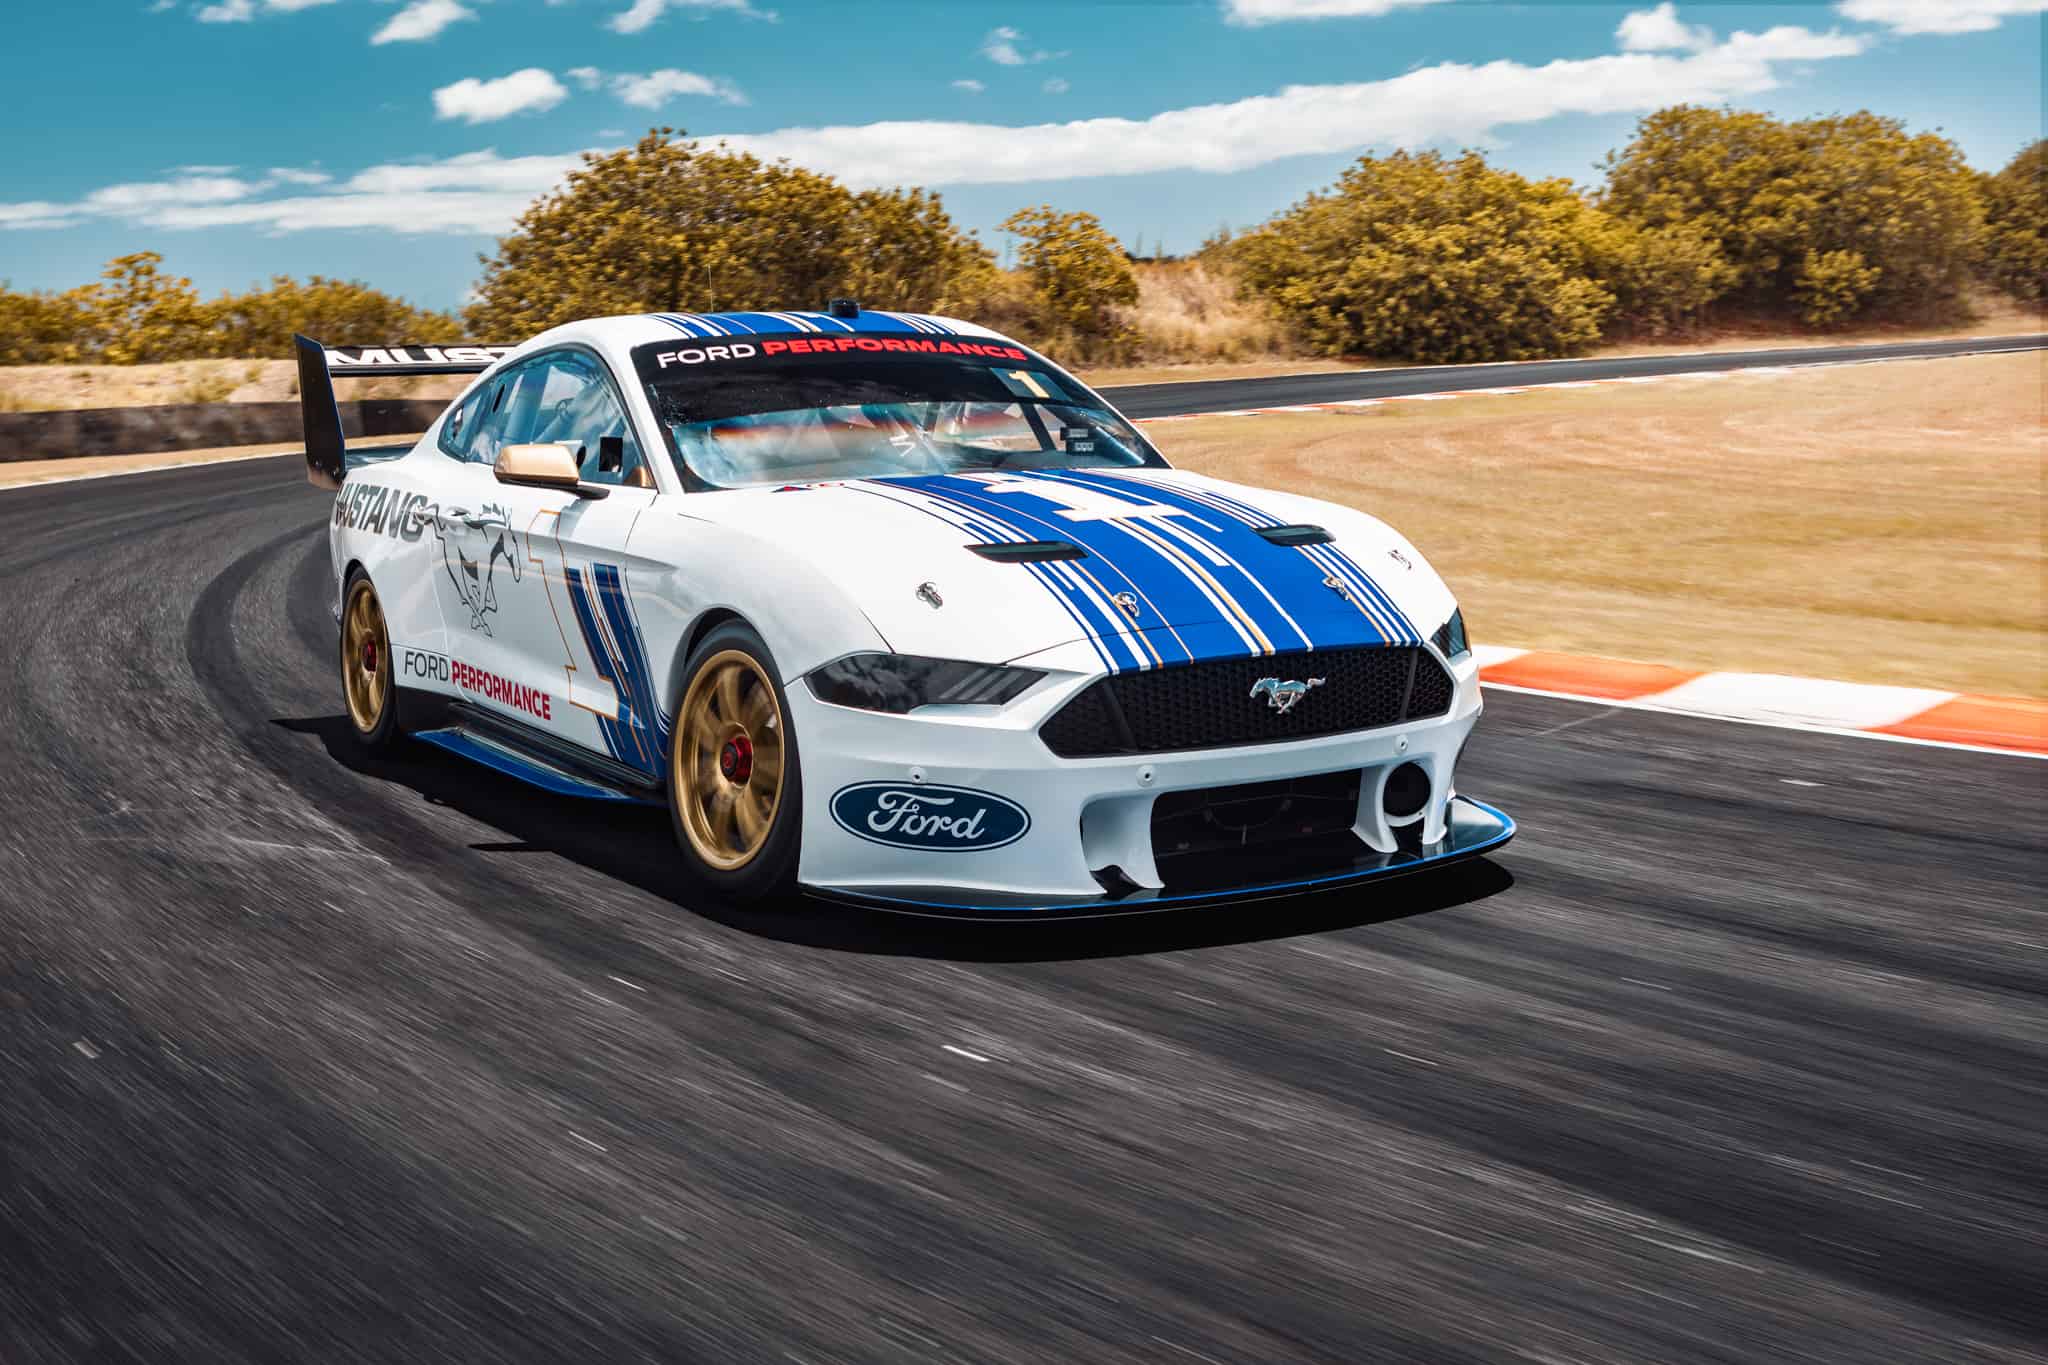 Mustang Supercar on track - Front view 3